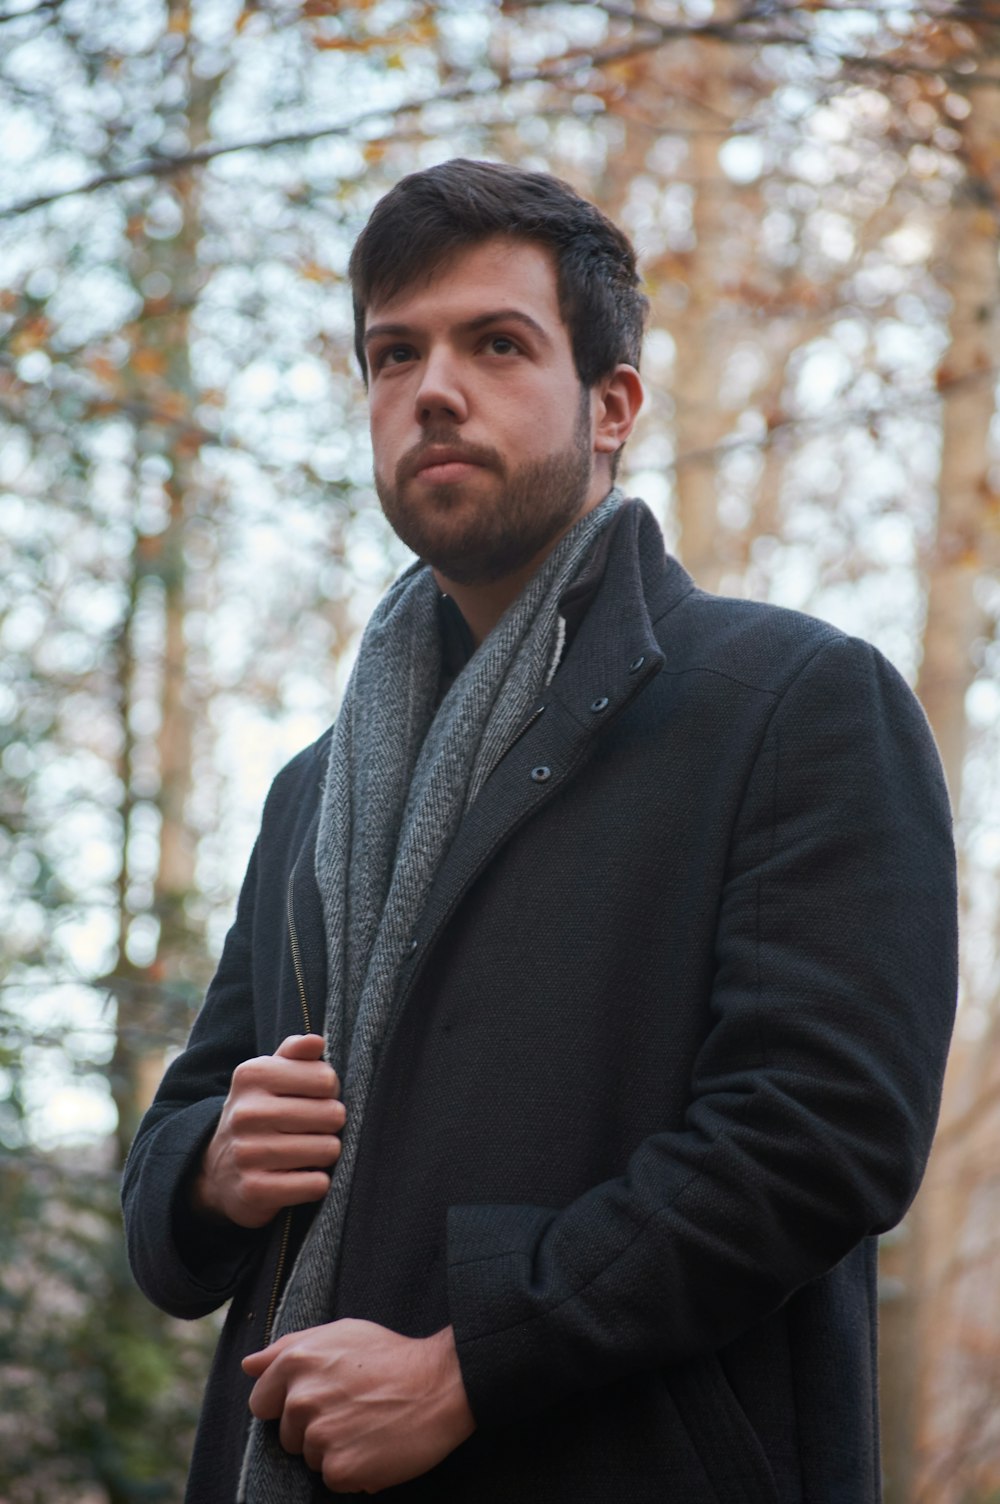 man in black coat standing near trees during daytime